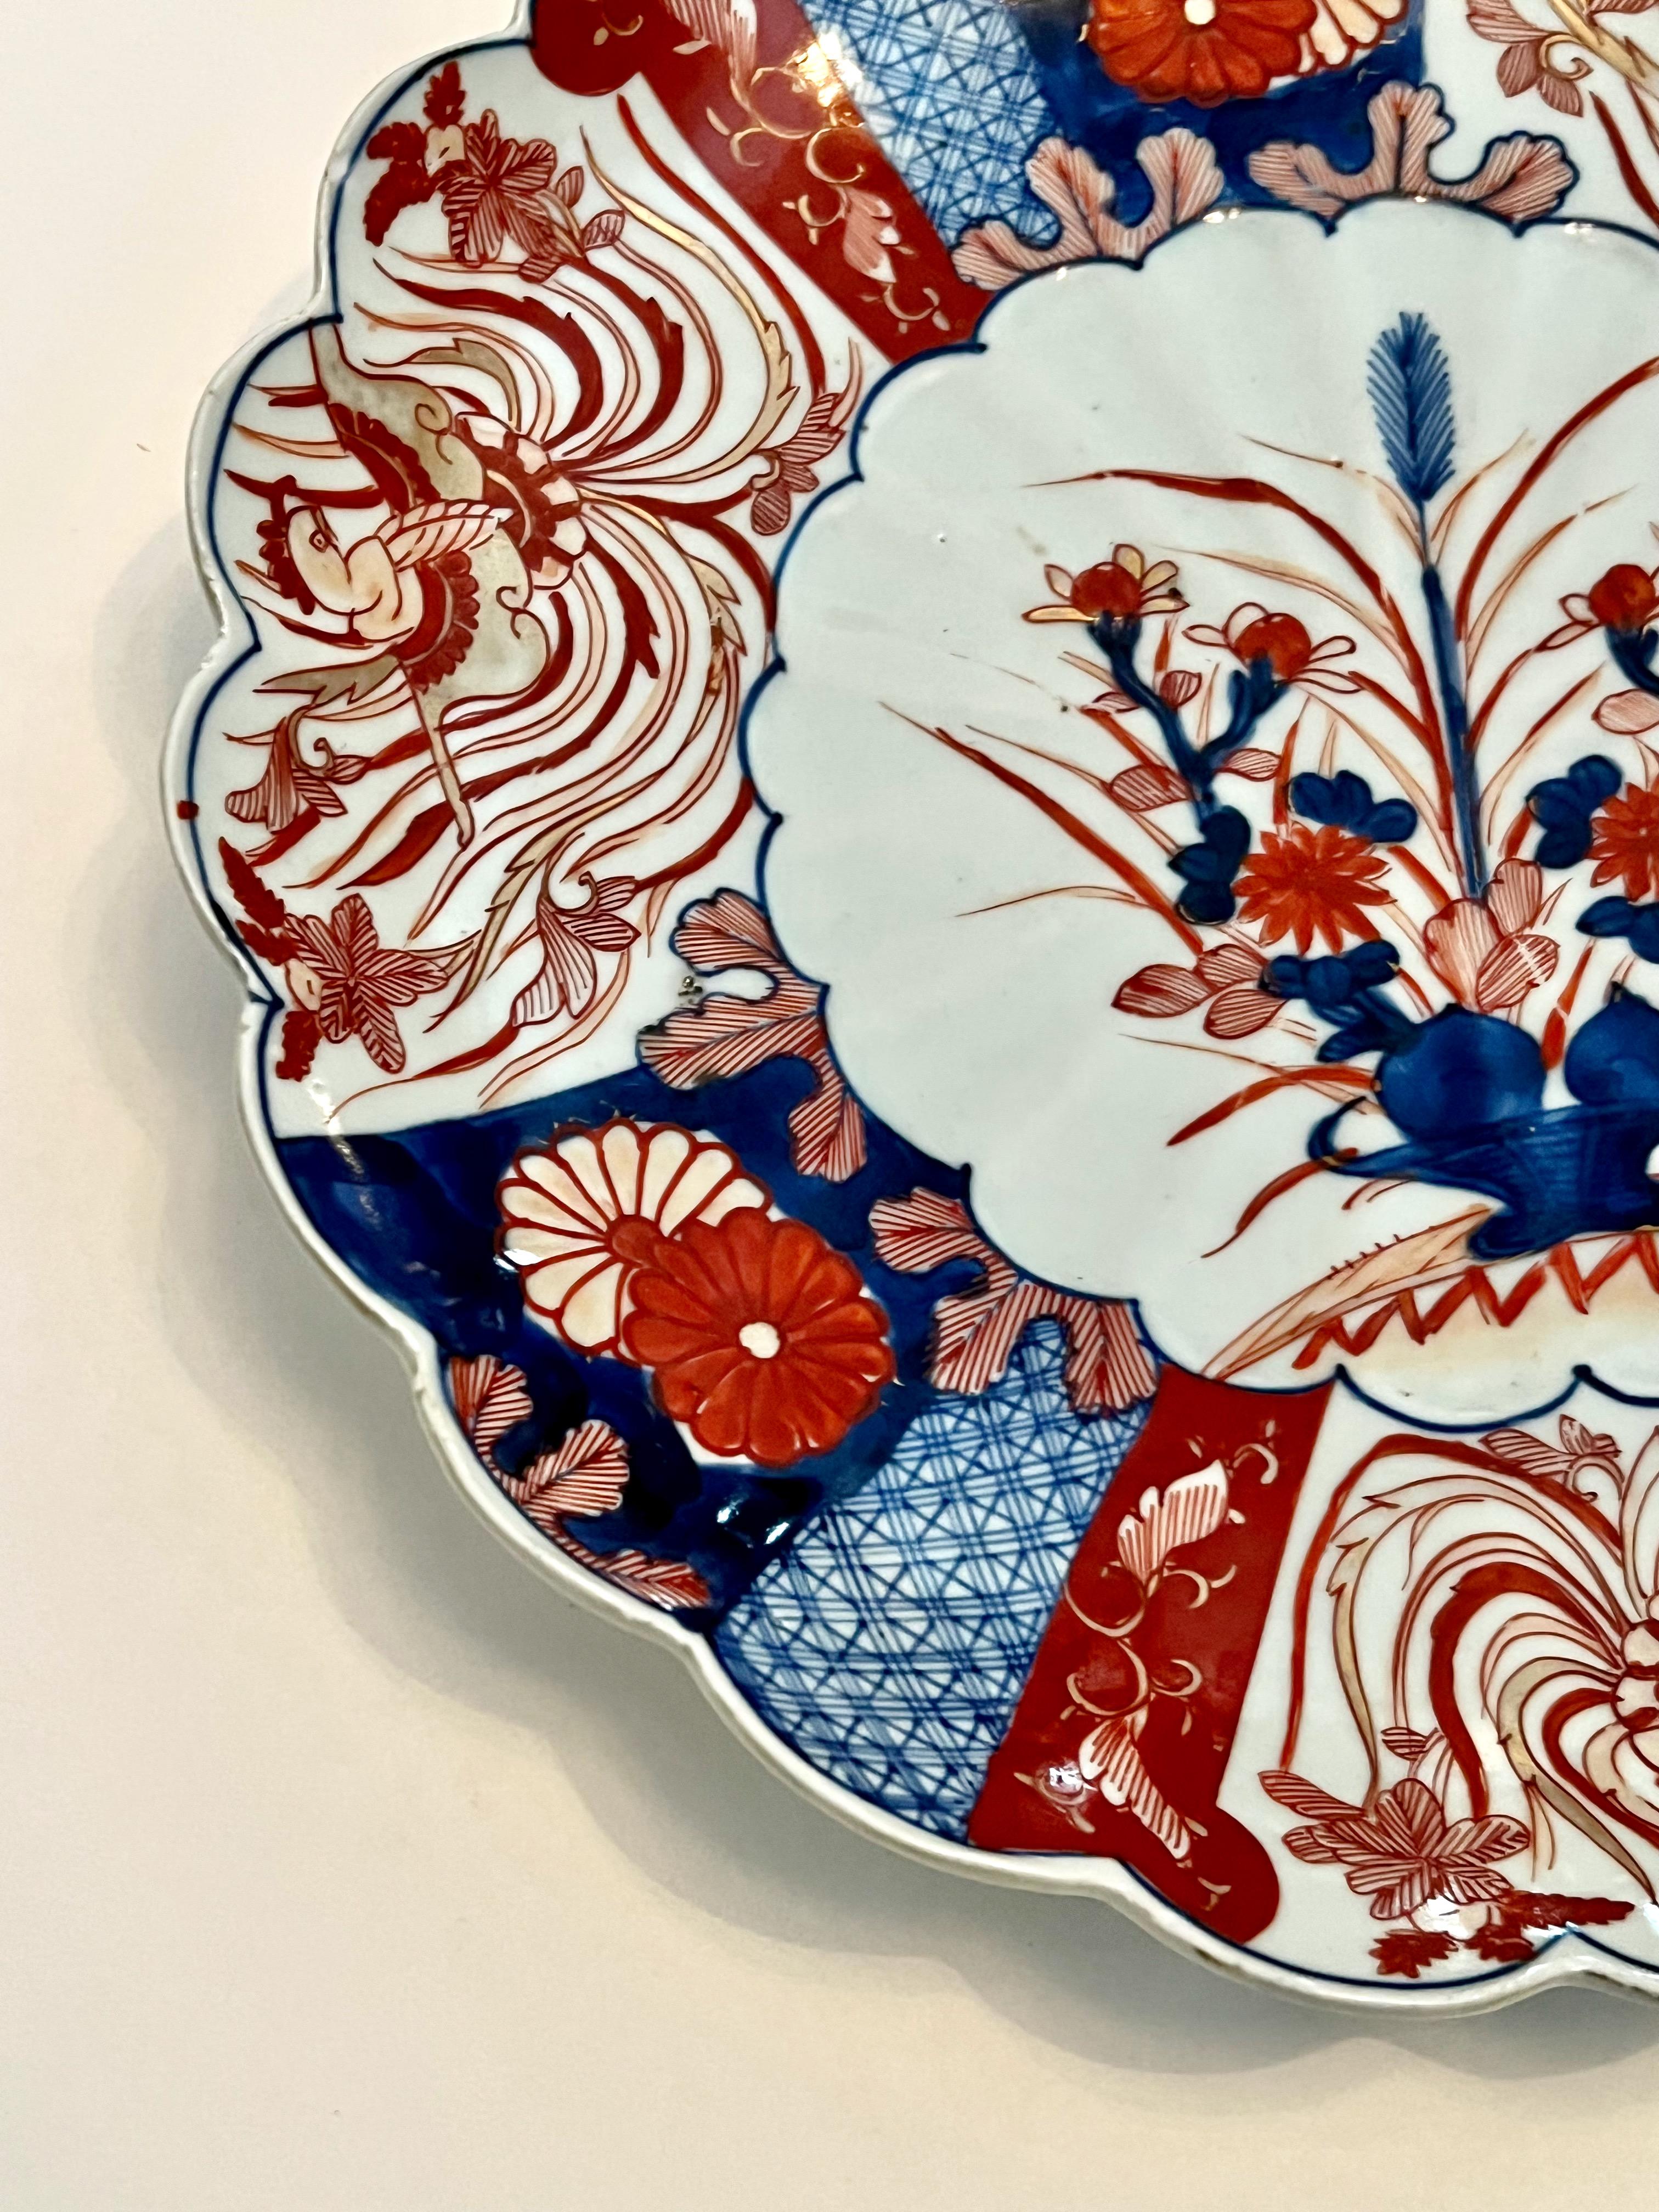 This is a classic example of a Meiji period imari charger. The charger measures 12 inches in diameter and features a central flower basket reserve surround with diapering and 3 hoho bird reserves. The back of the charger features an uncommon pattern